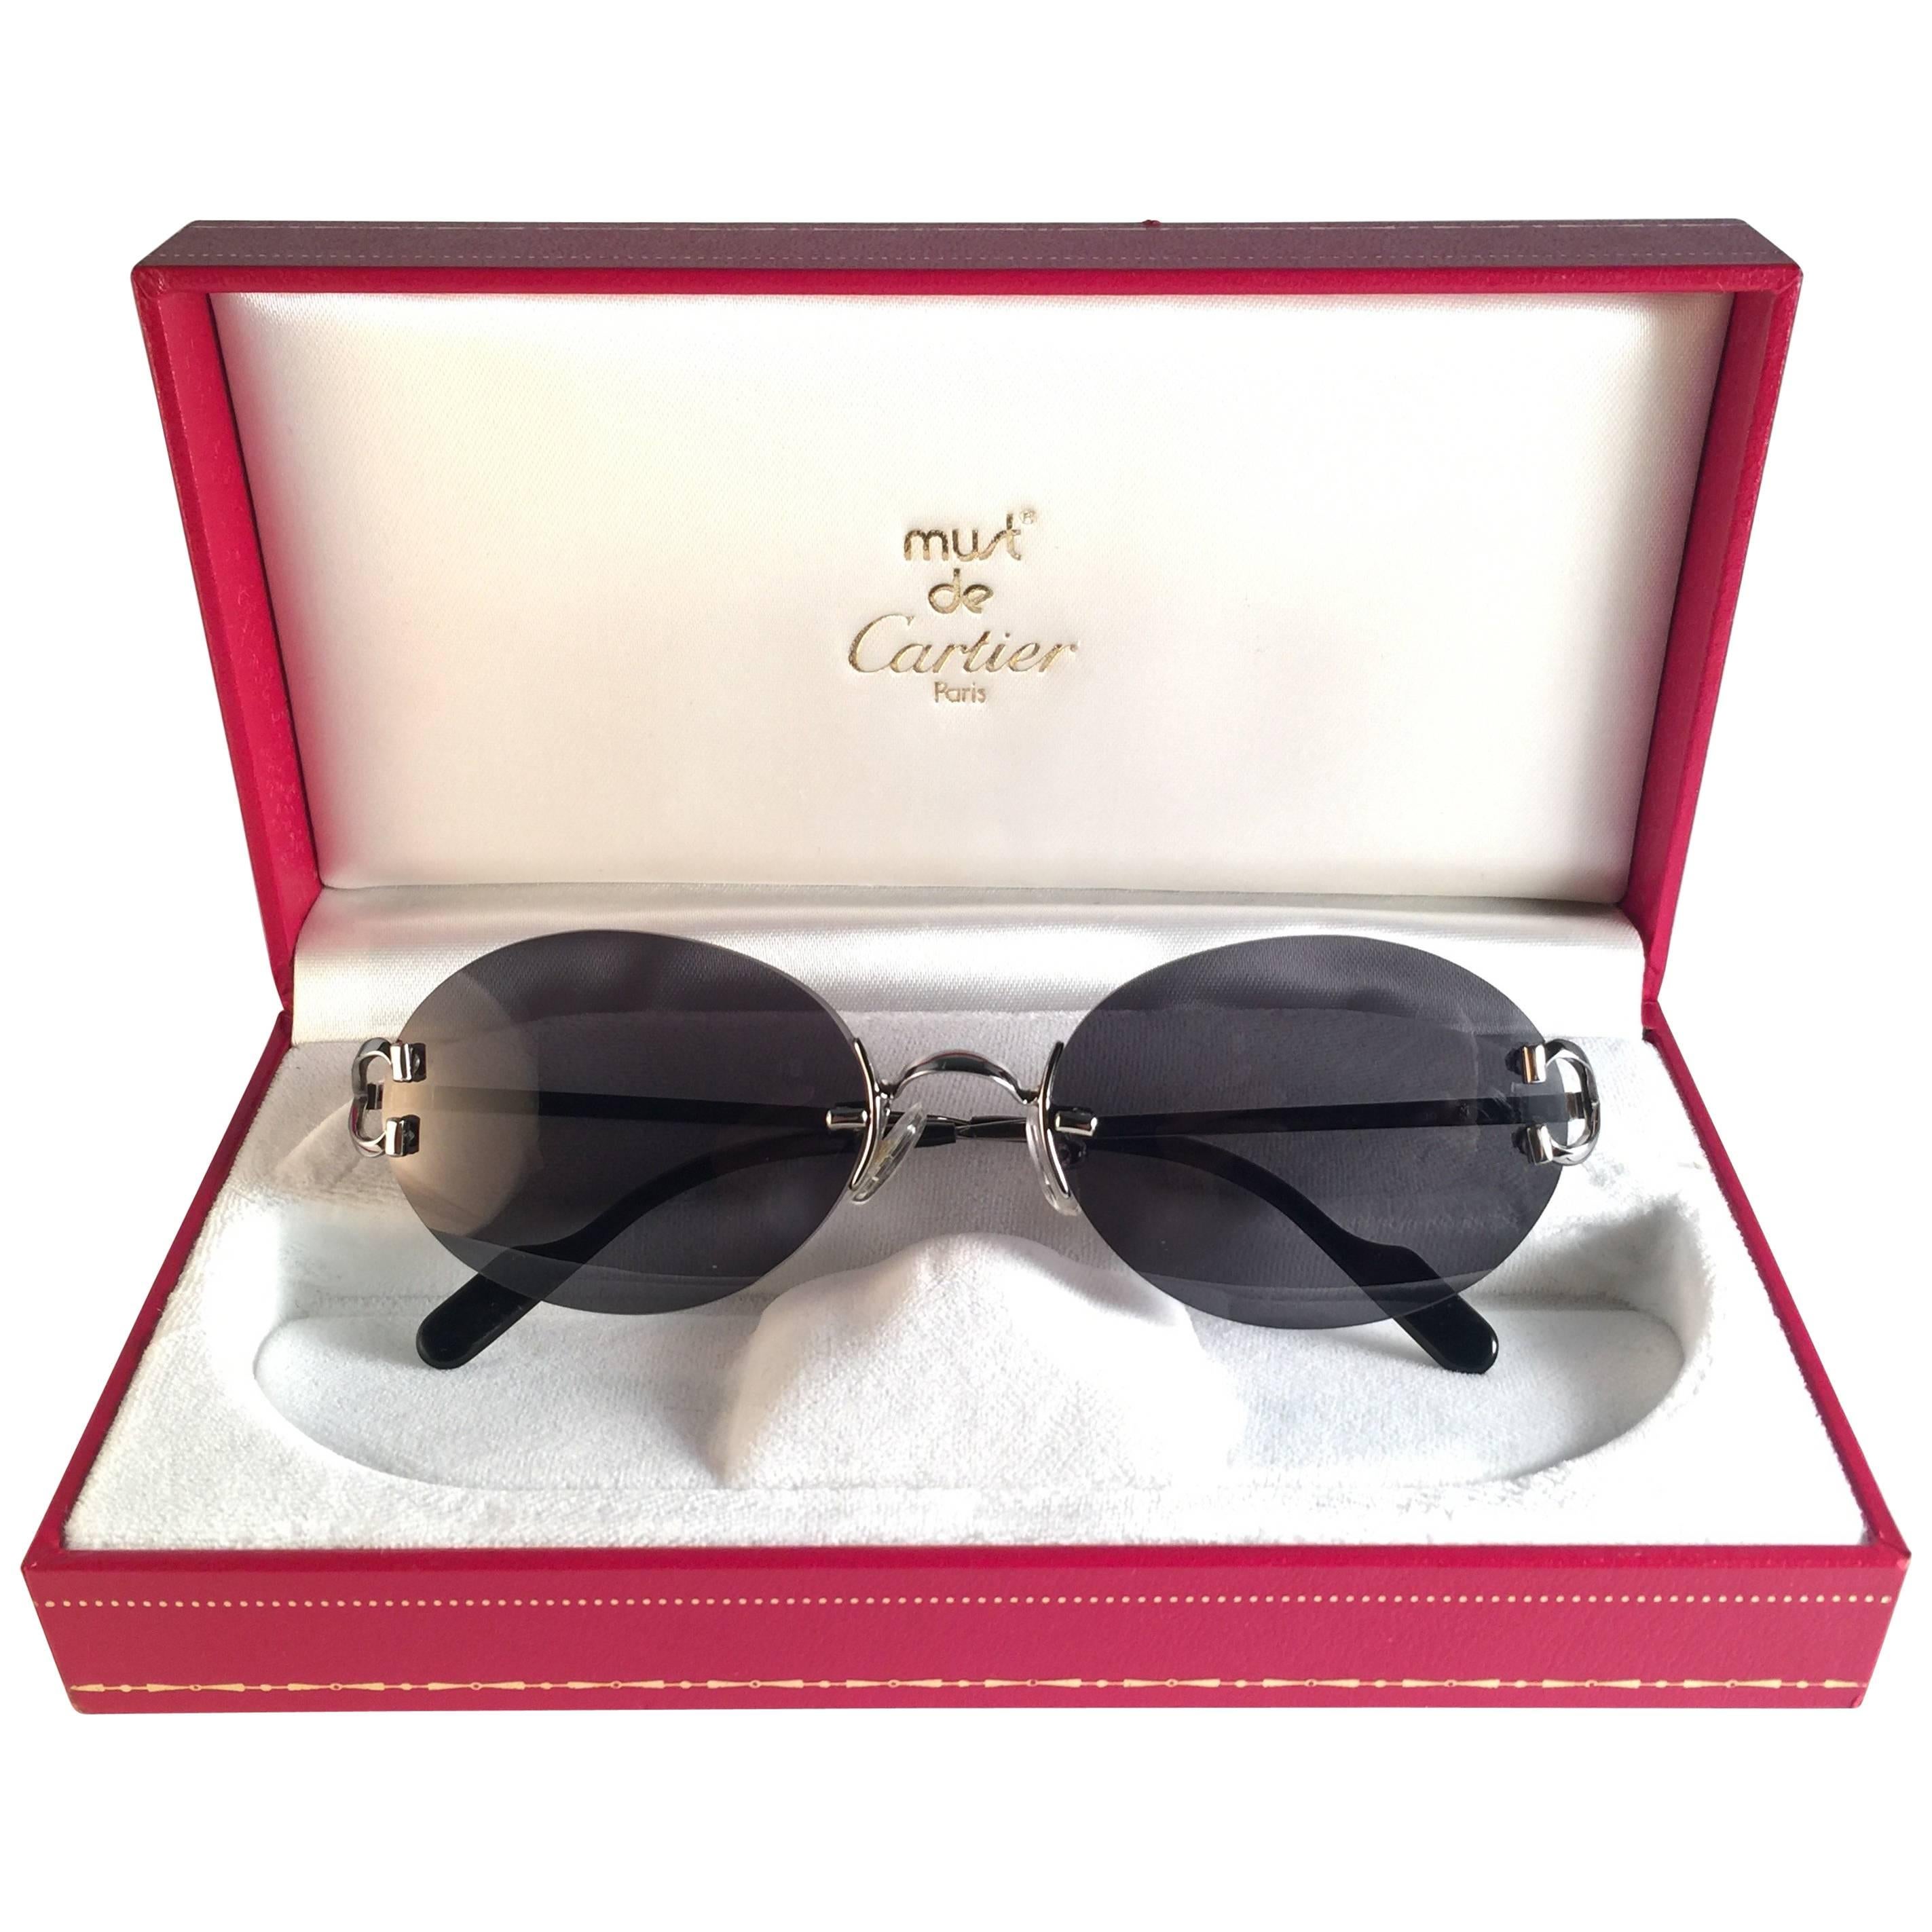 old cartier sunglasses